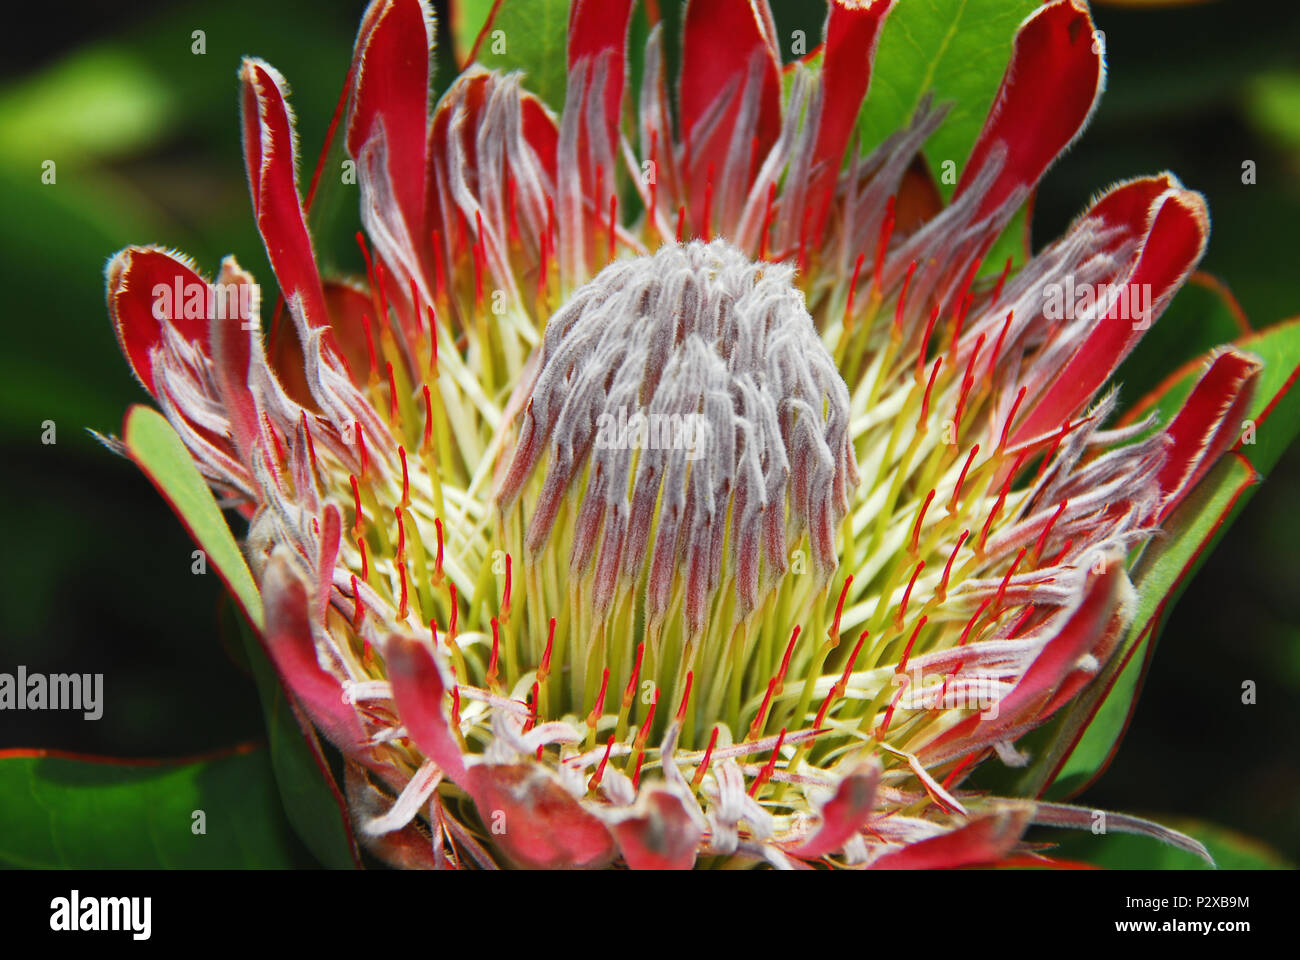 Protea Fynbos are rare exotic large flowers native to South Africa.  This beautiful bloom is a fine example of its complex nature. Stock Photo